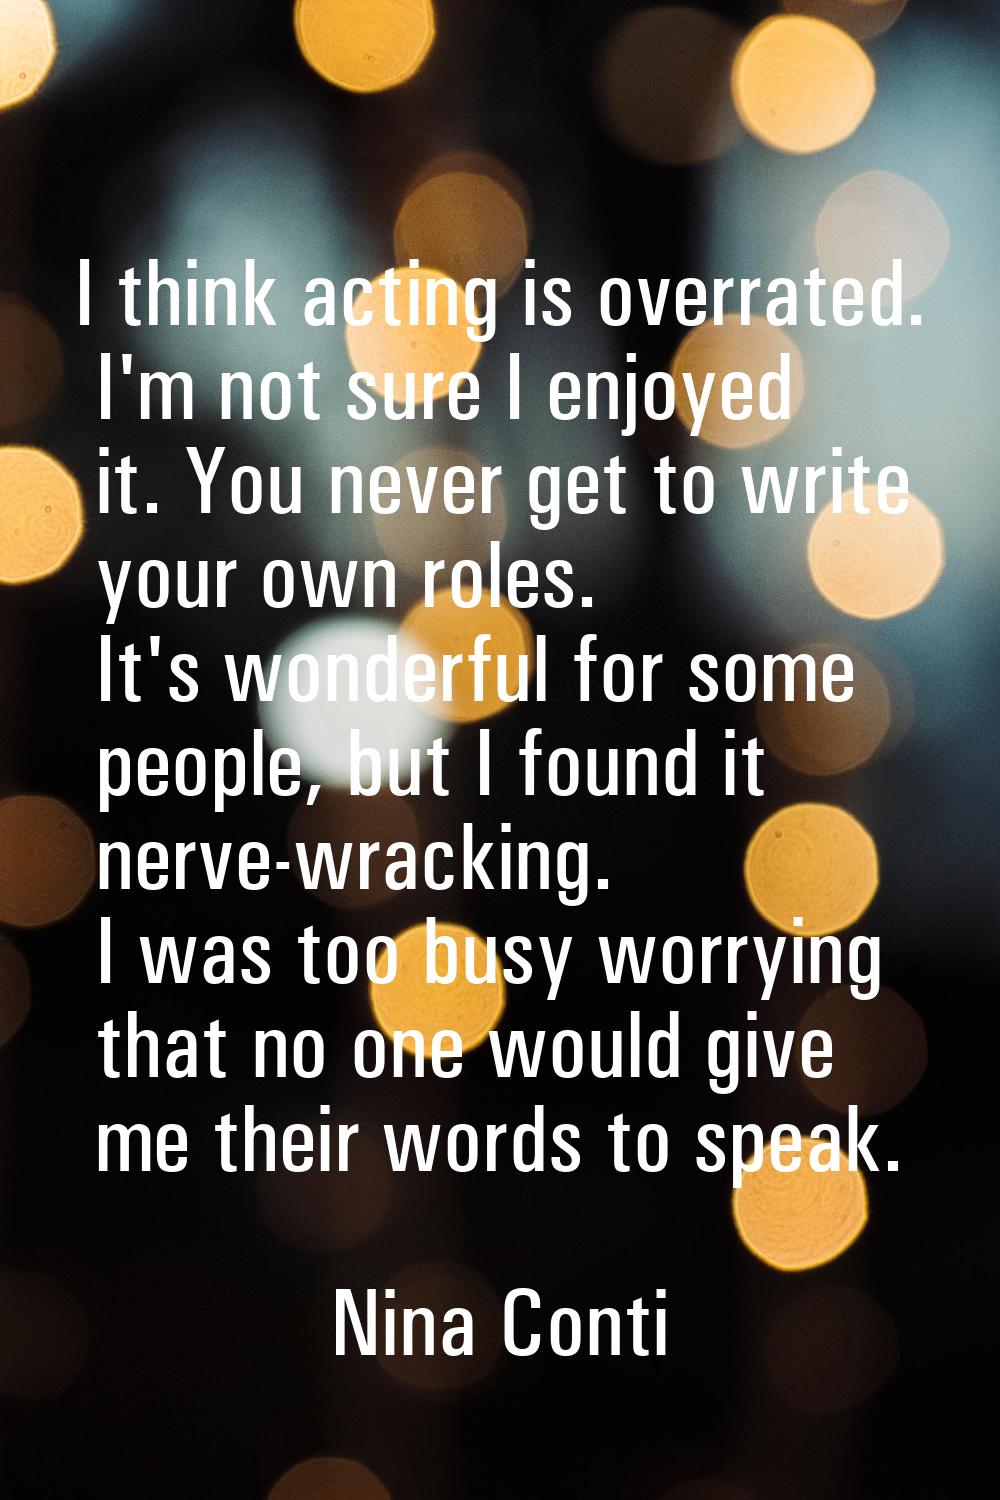 I think acting is overrated. I'm not sure I enjoyed it. You never get to write your own roles. It's